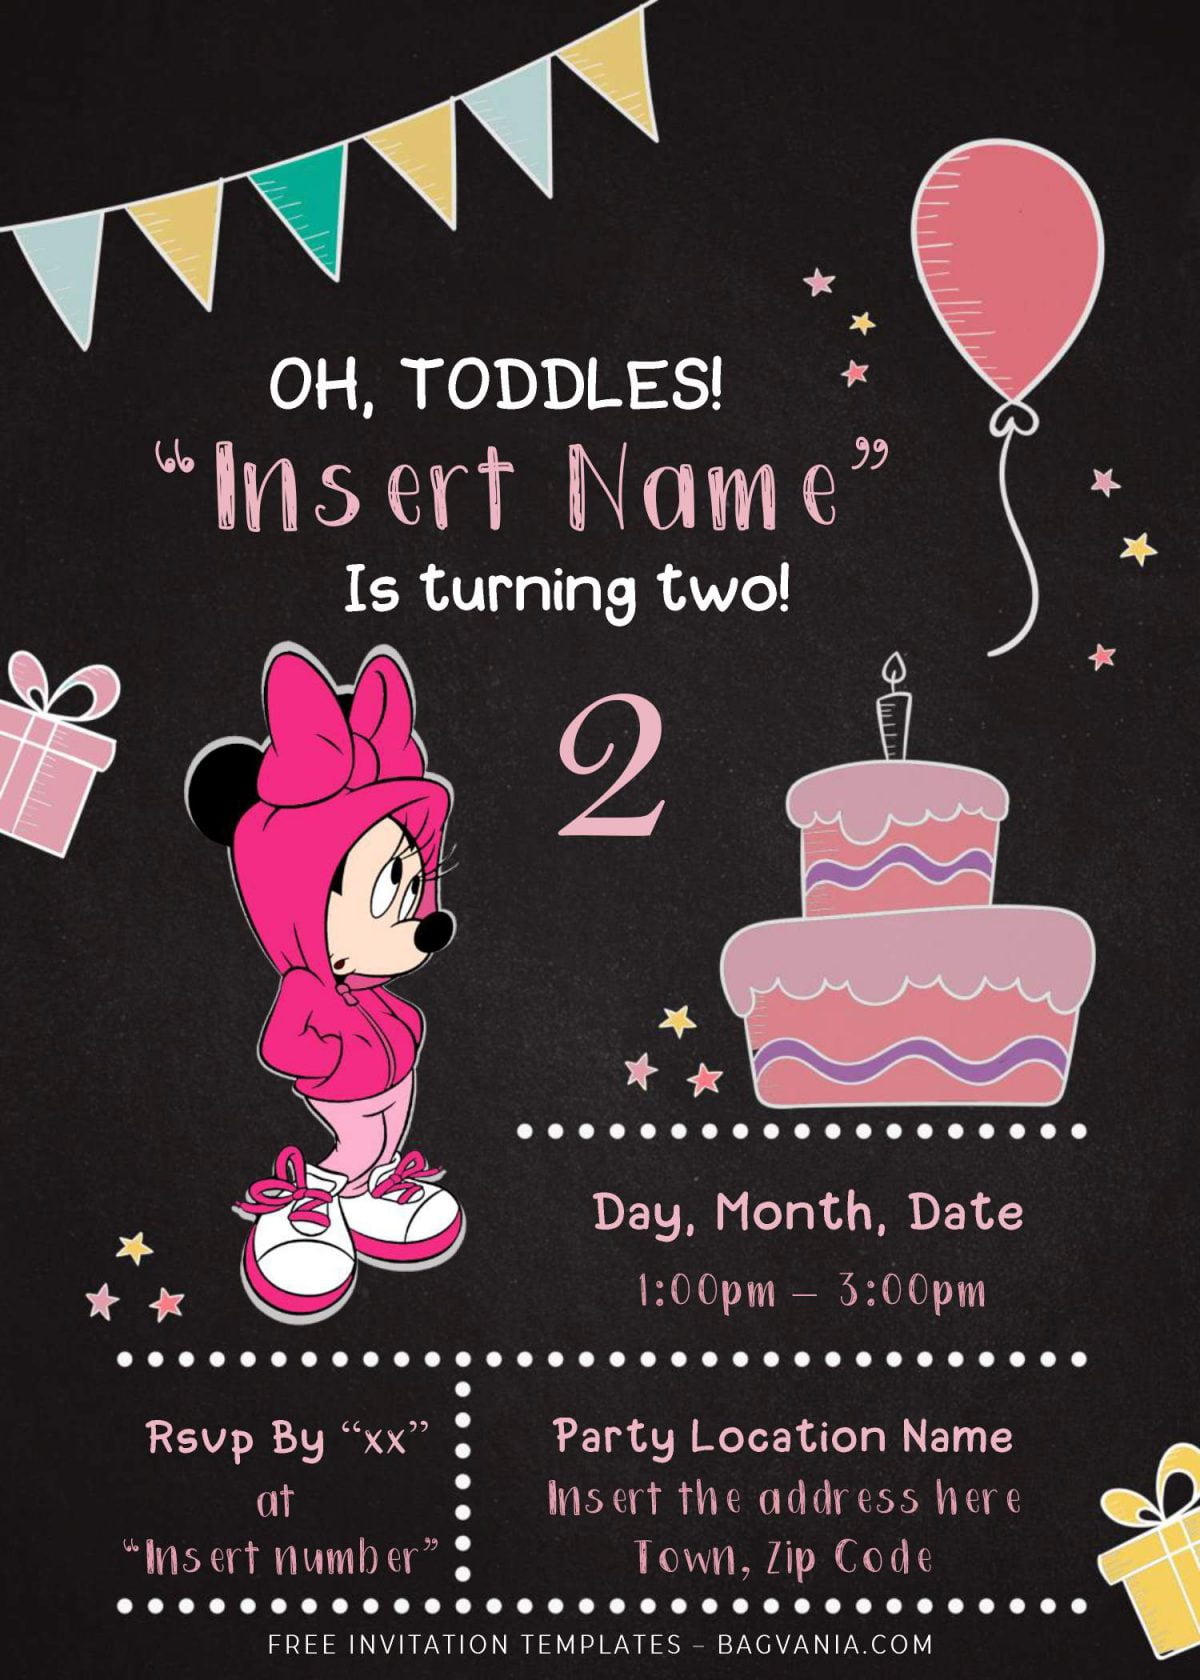 Free Minnie Mouse Chalkboard Birthday Invitation Templates For Word and has adorable and swag Minnie mouse in pink hoodie